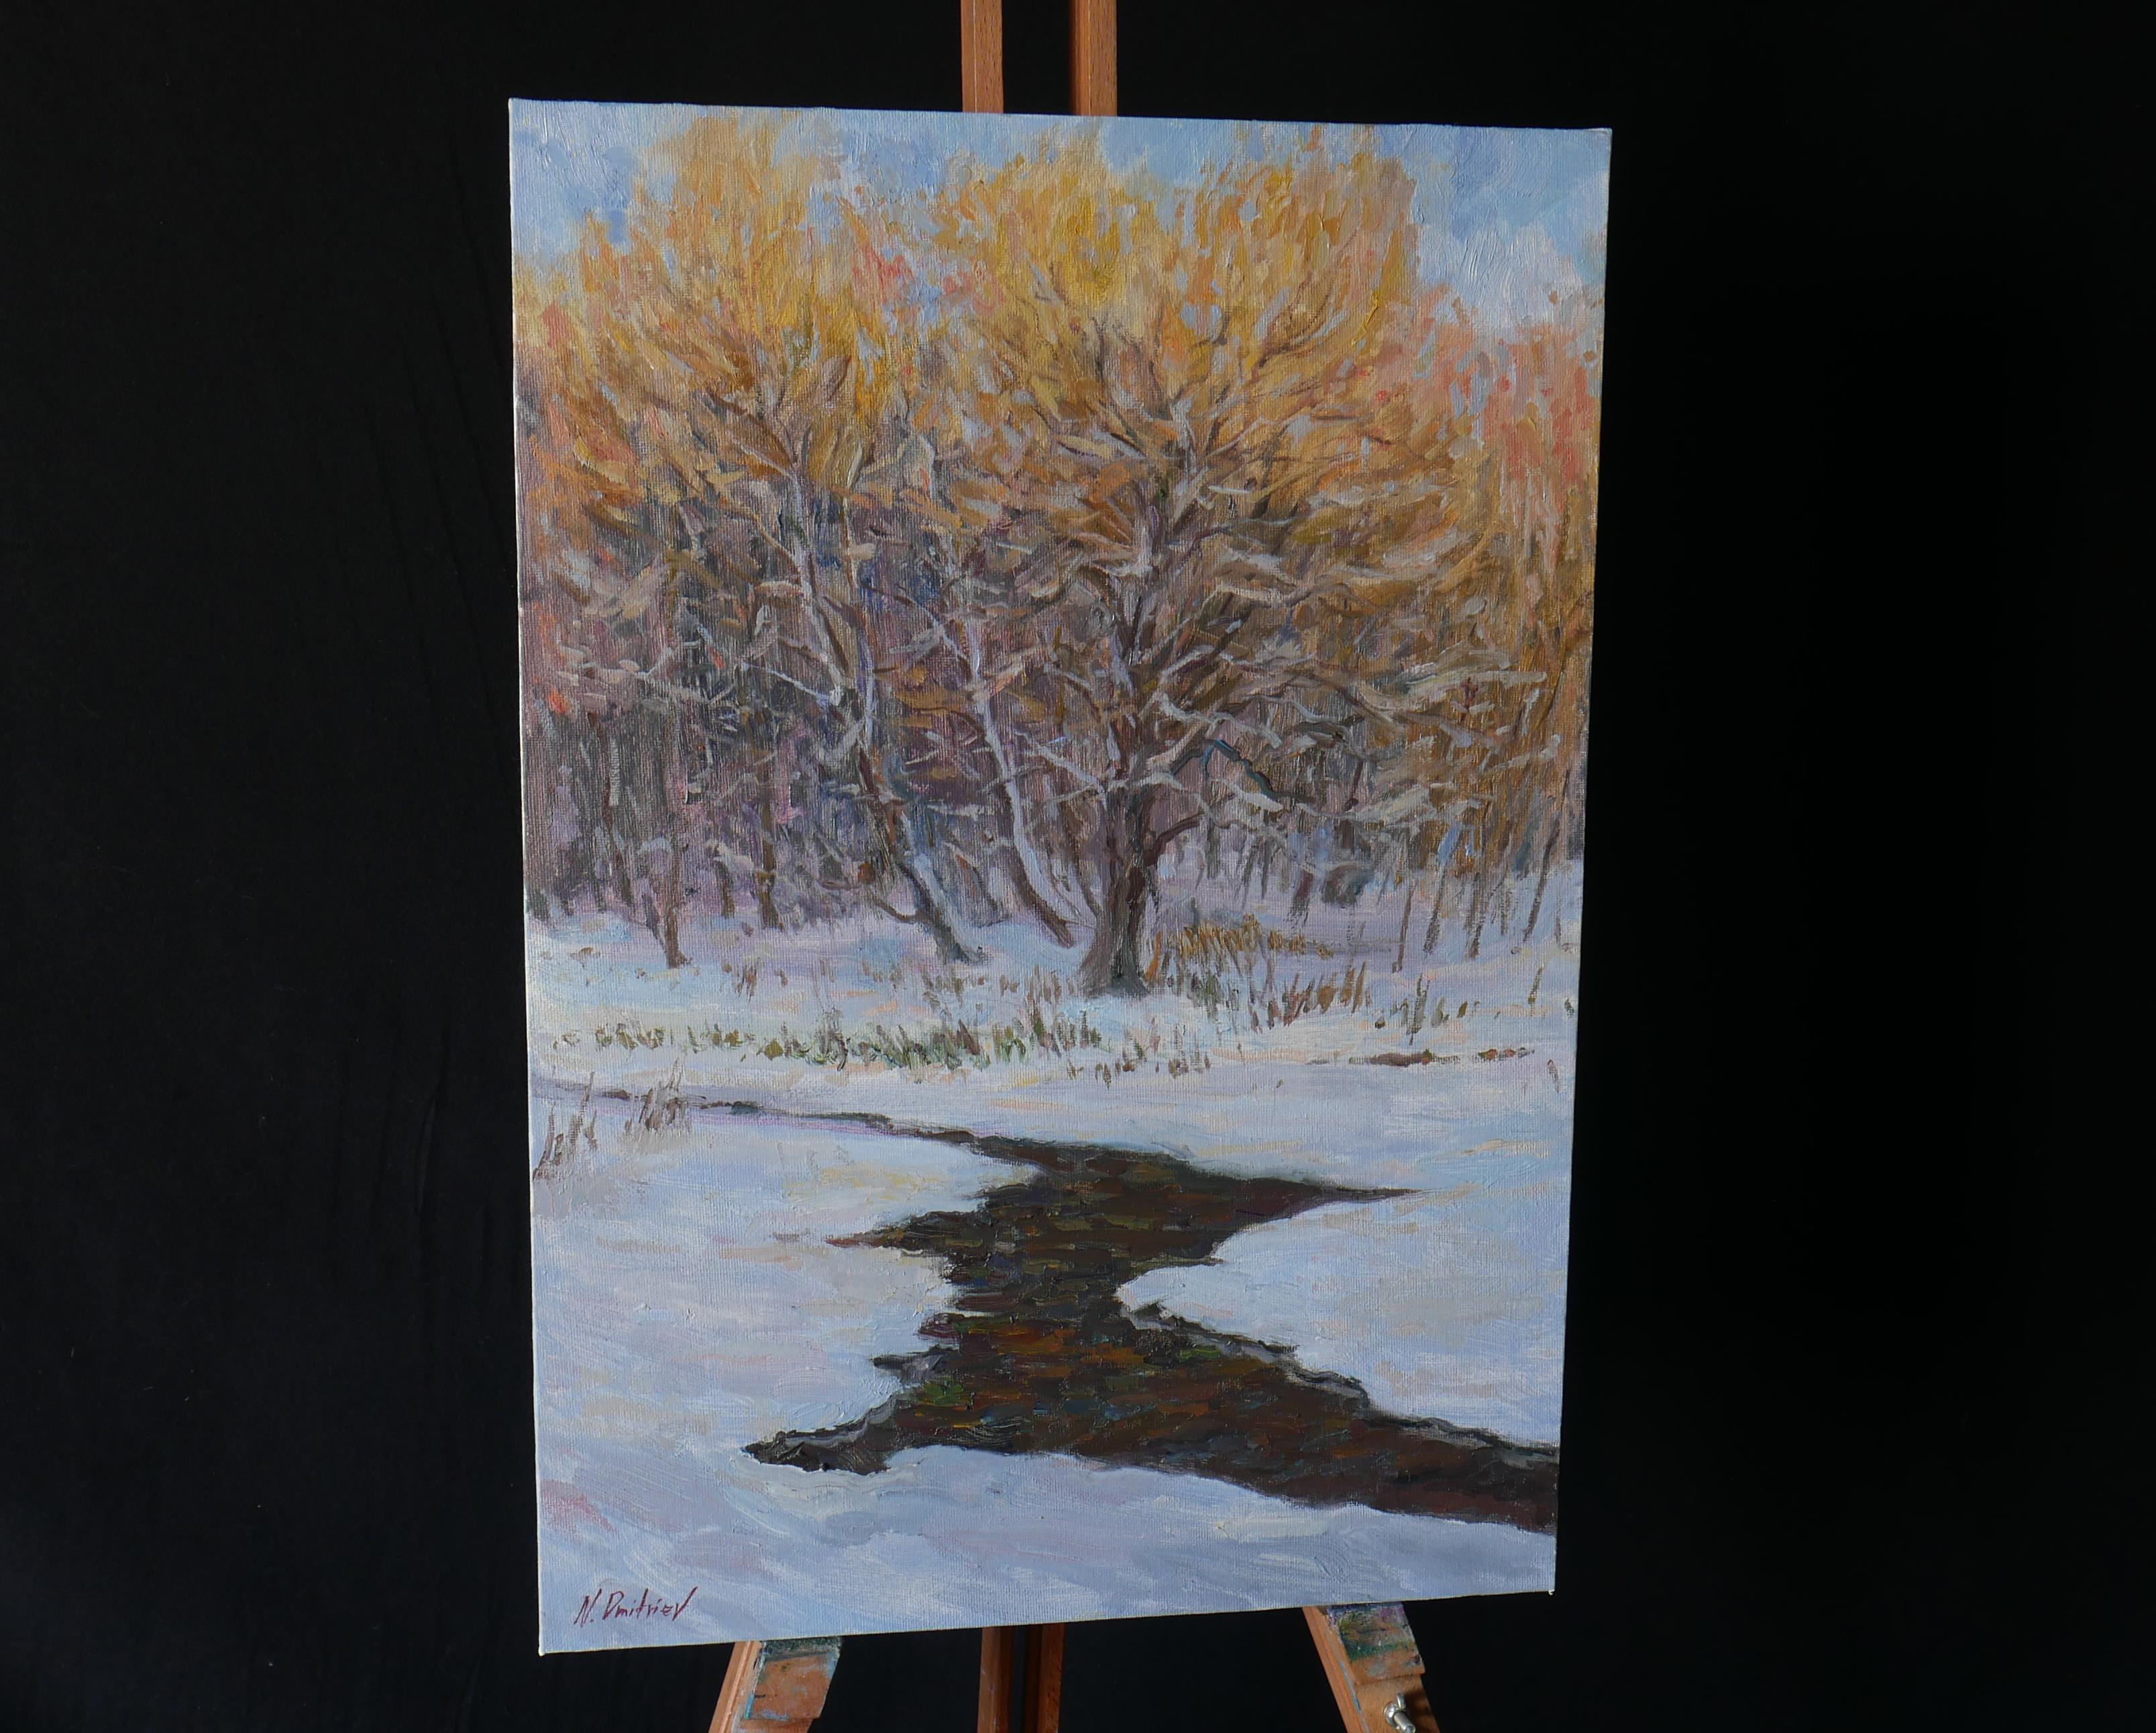 The Latest Touches Of The Winter Sun - winter river landscape painting - Painting by Nikolay Dmitriev